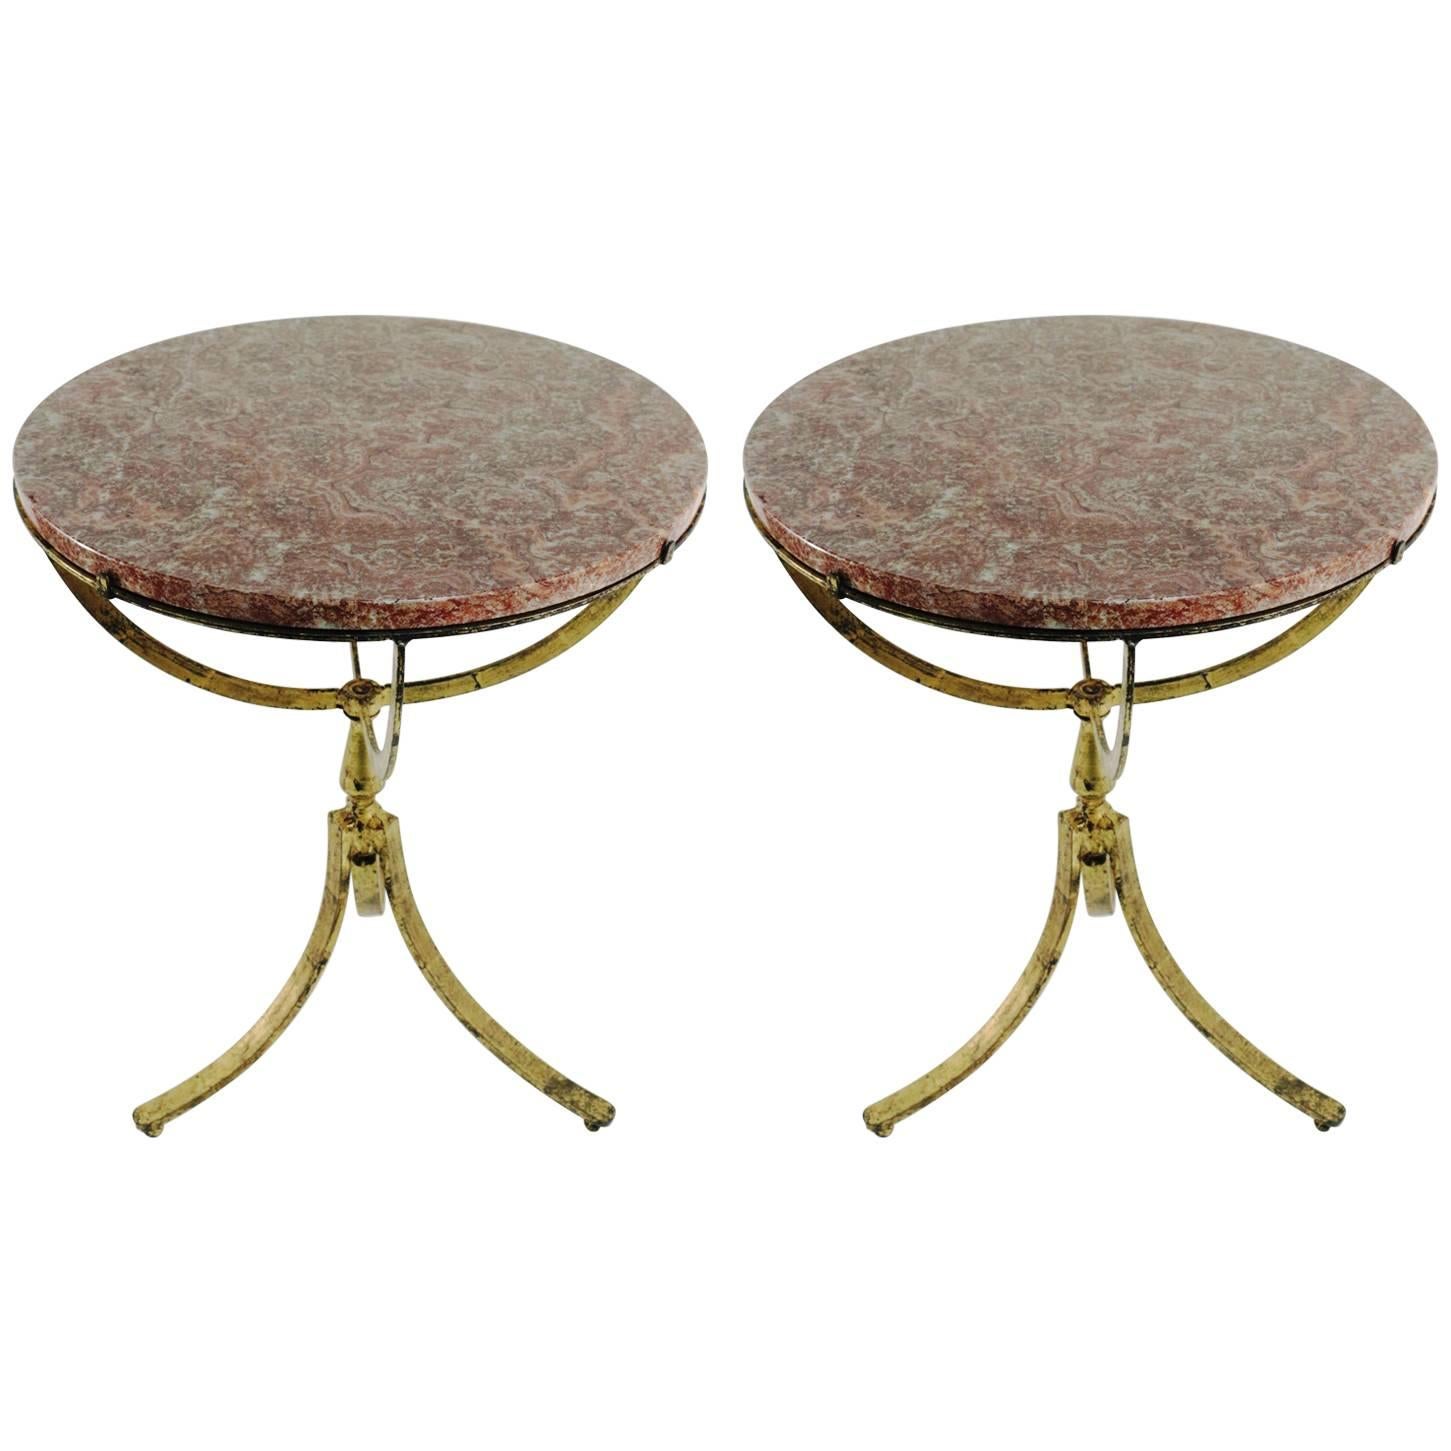 Beautiful Pair of Gilded Wrought Iron Gueridons, Marble Tops, 1950s-1960s For Sale